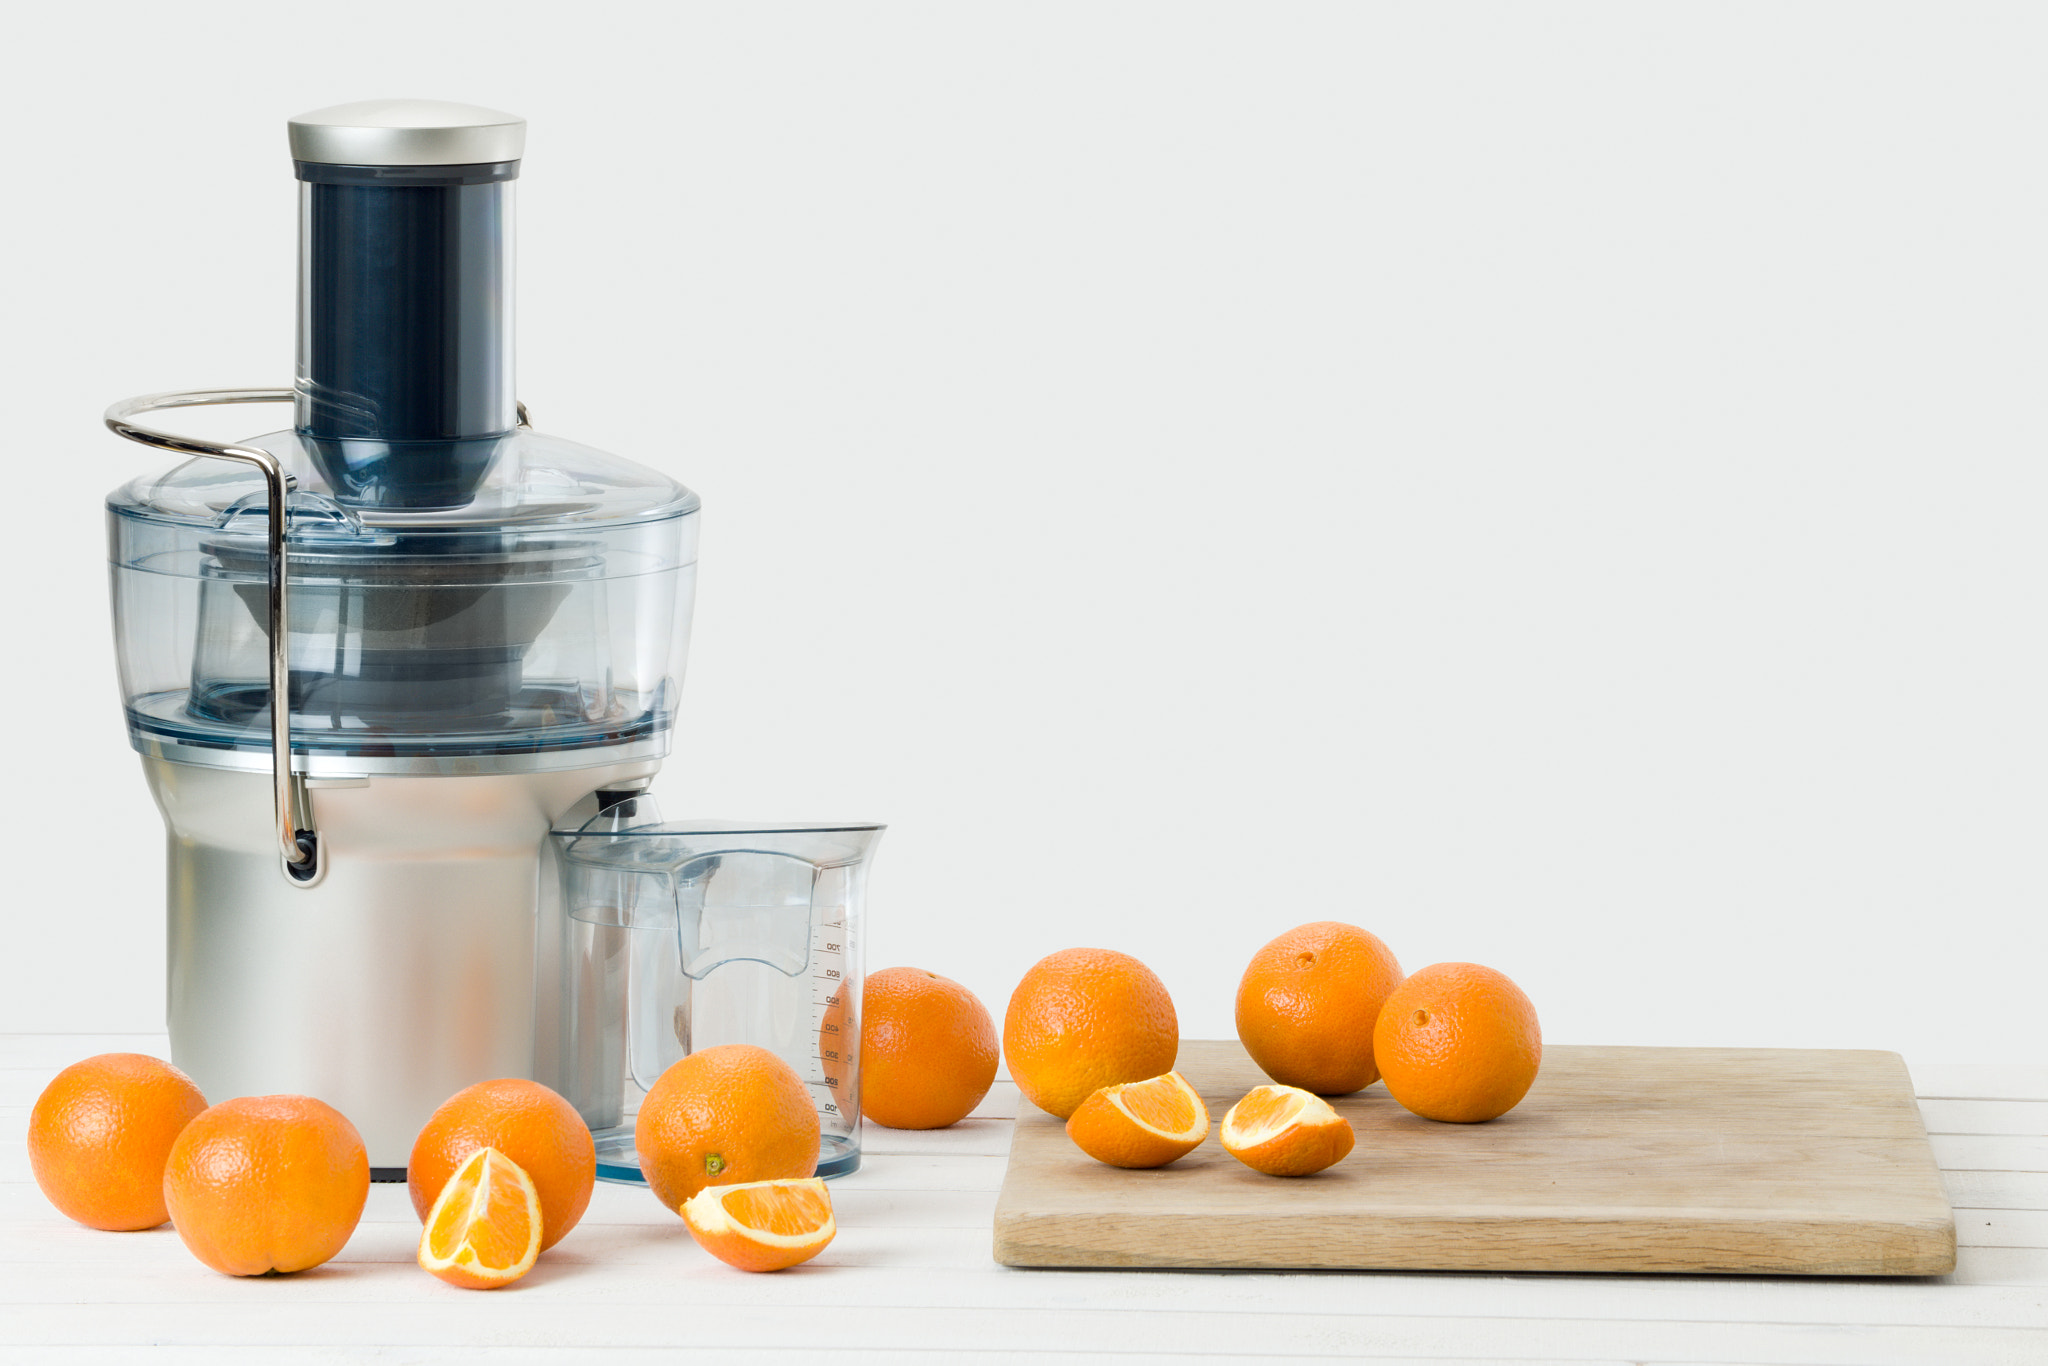 Nikon D810 sample photo. Modern electric juicer and fresh oranges, white background with copy space photography